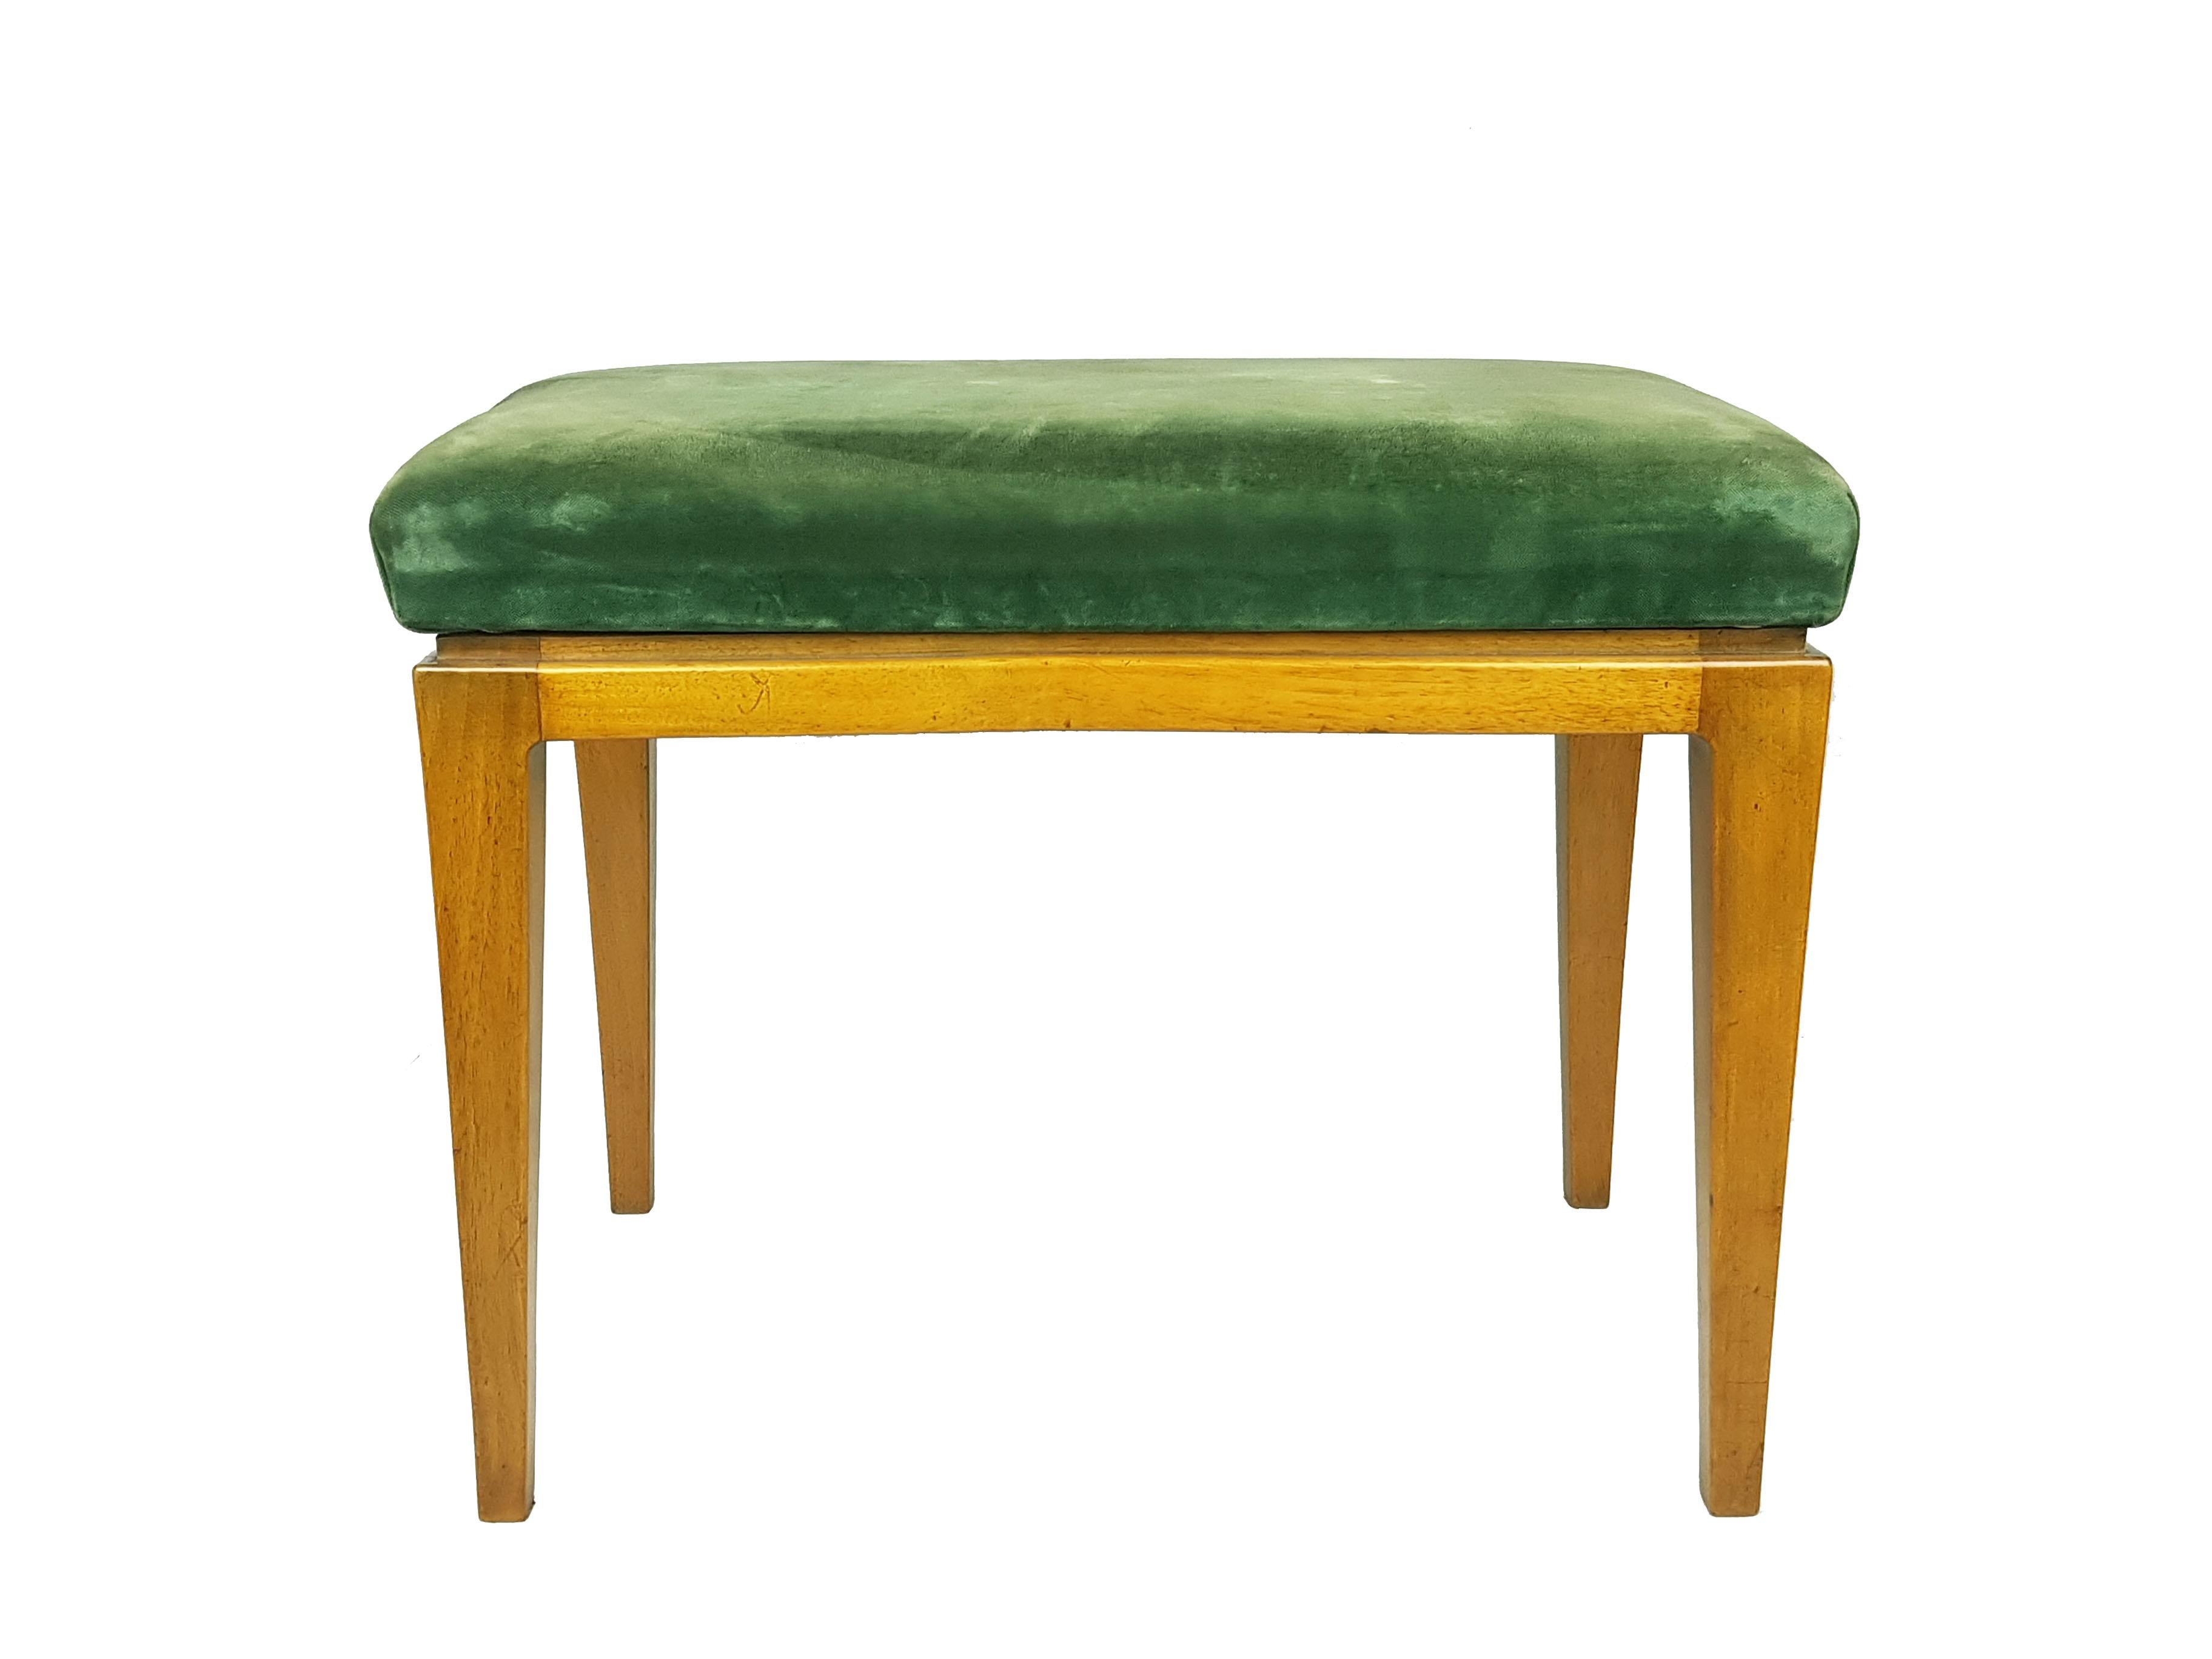 Pair of bedroom stools also usable as ottomans. Wooden structure with cushioned seats upholstered in green velvet. the wooden structures have been refinished keeping their original patina. The velvet is original but shows visible signs of wear and